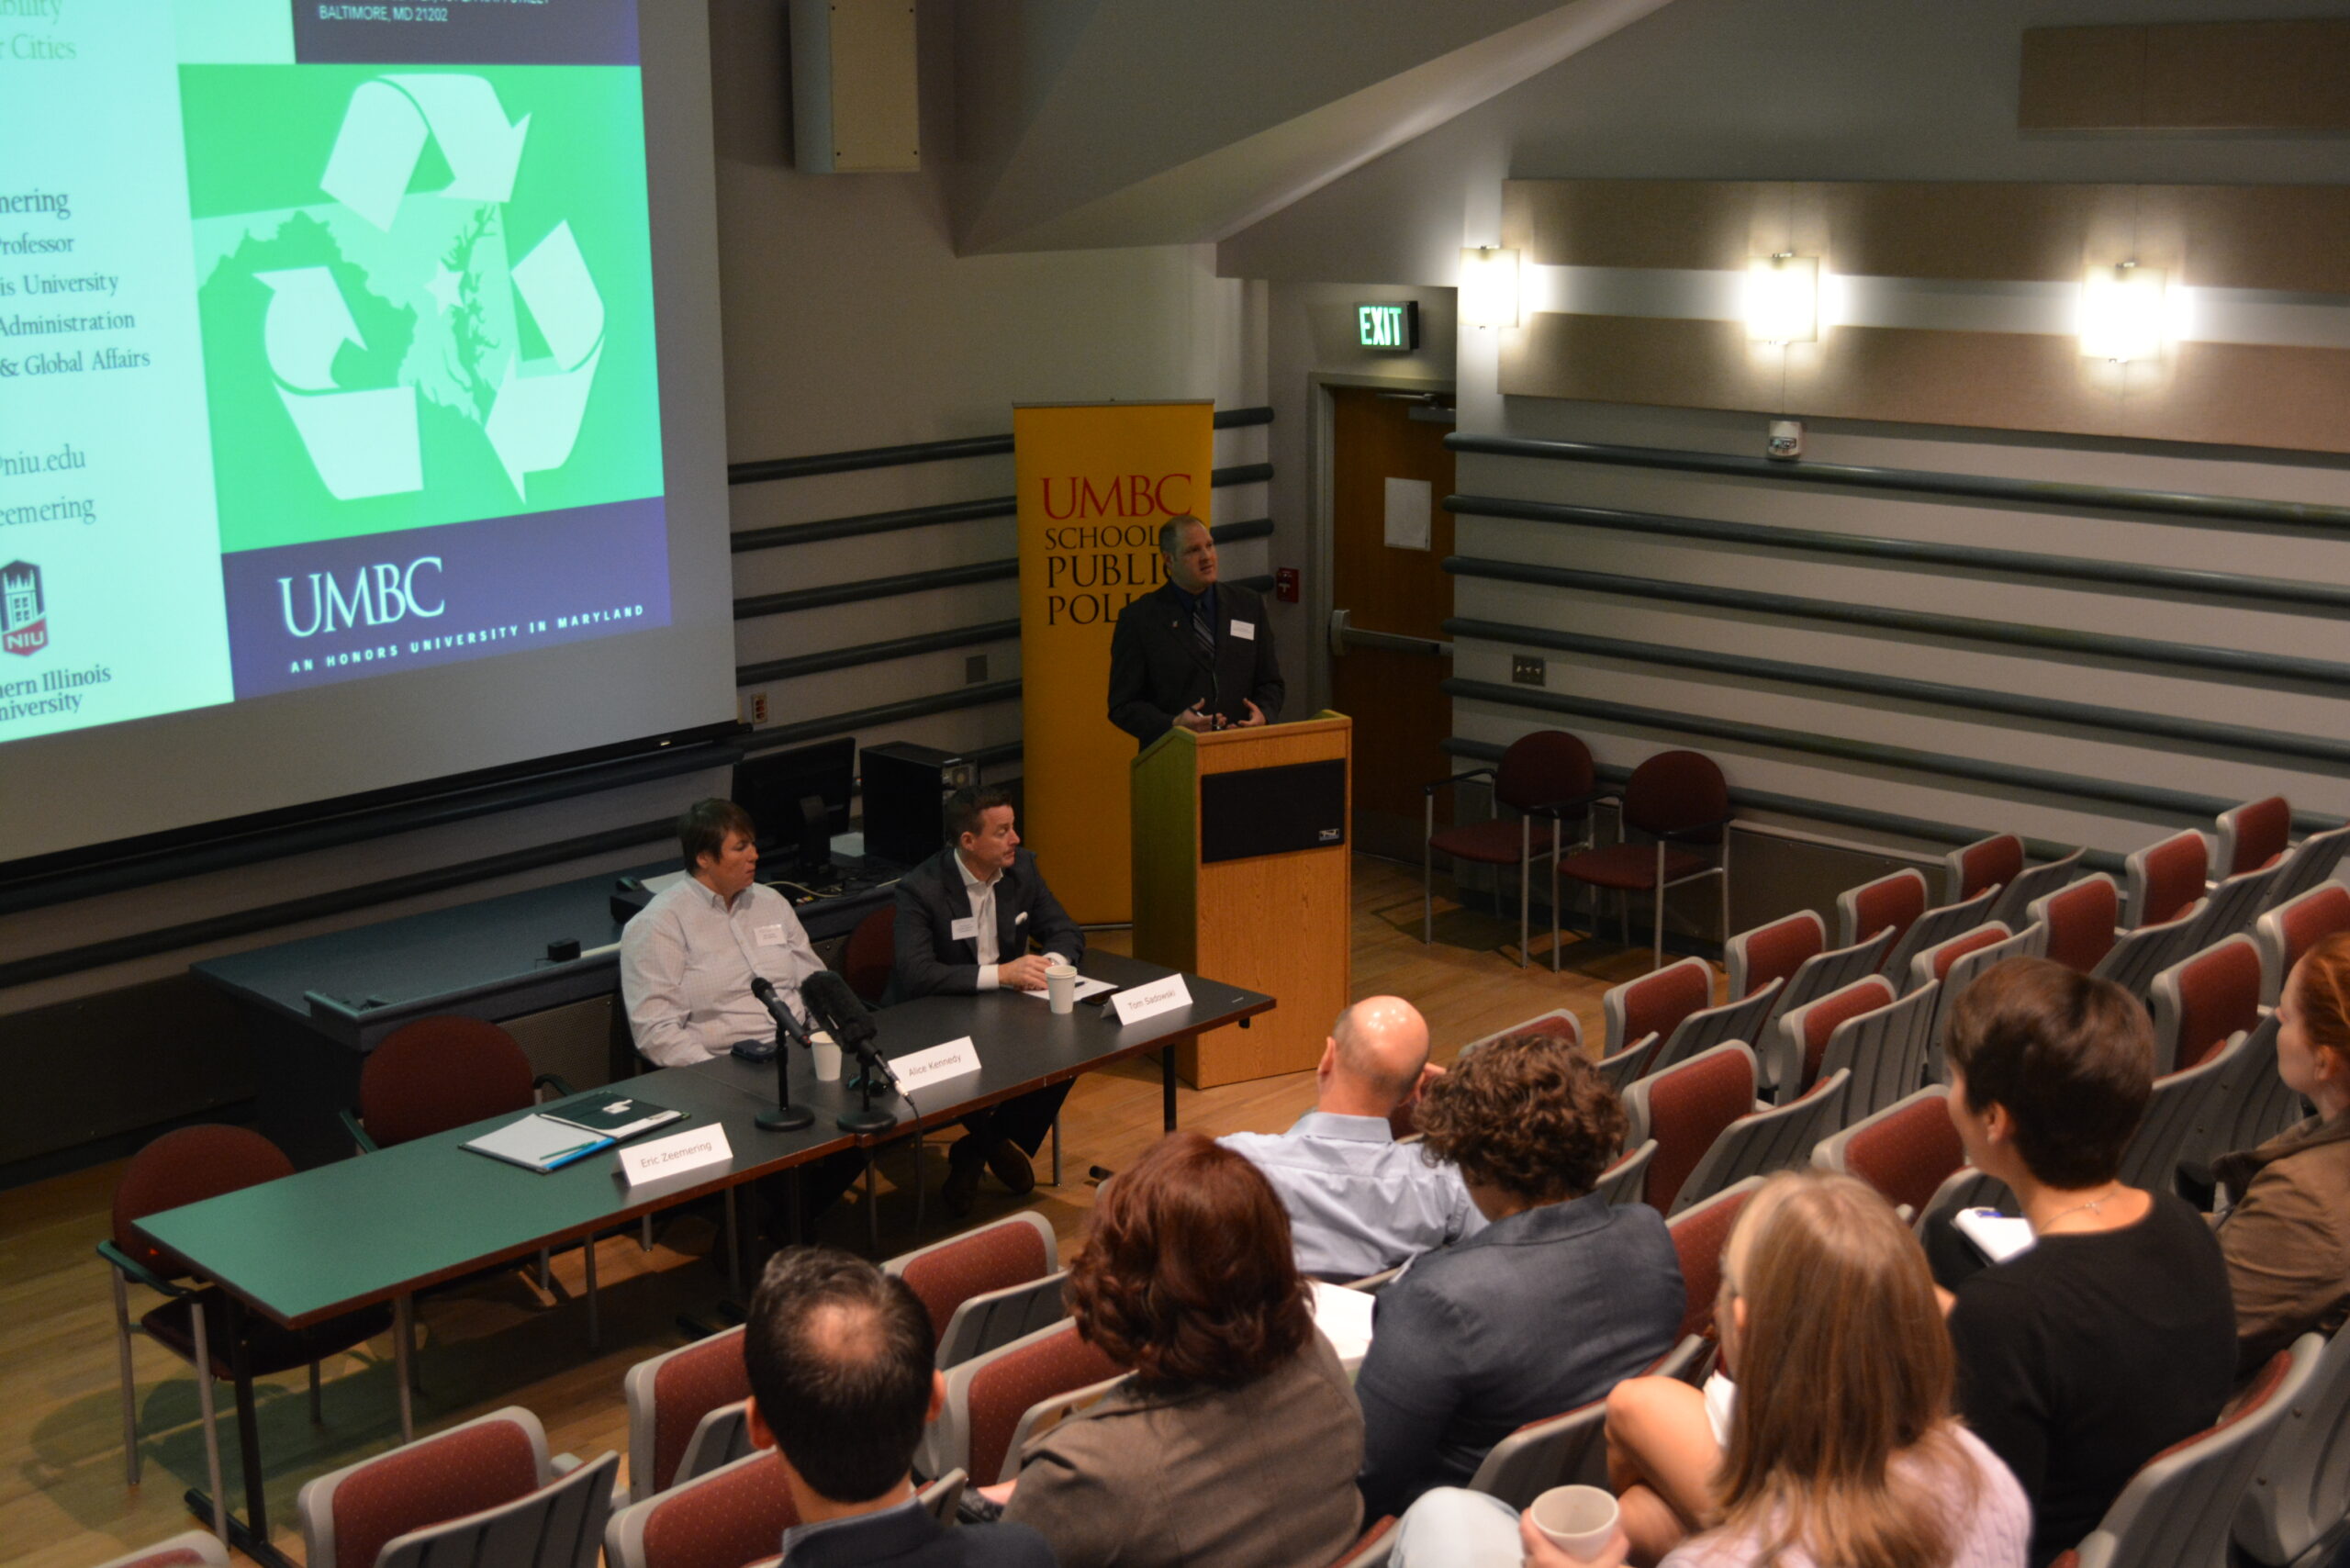 School of Public Policy hosts forum on Urban Sustainability in Baltimore